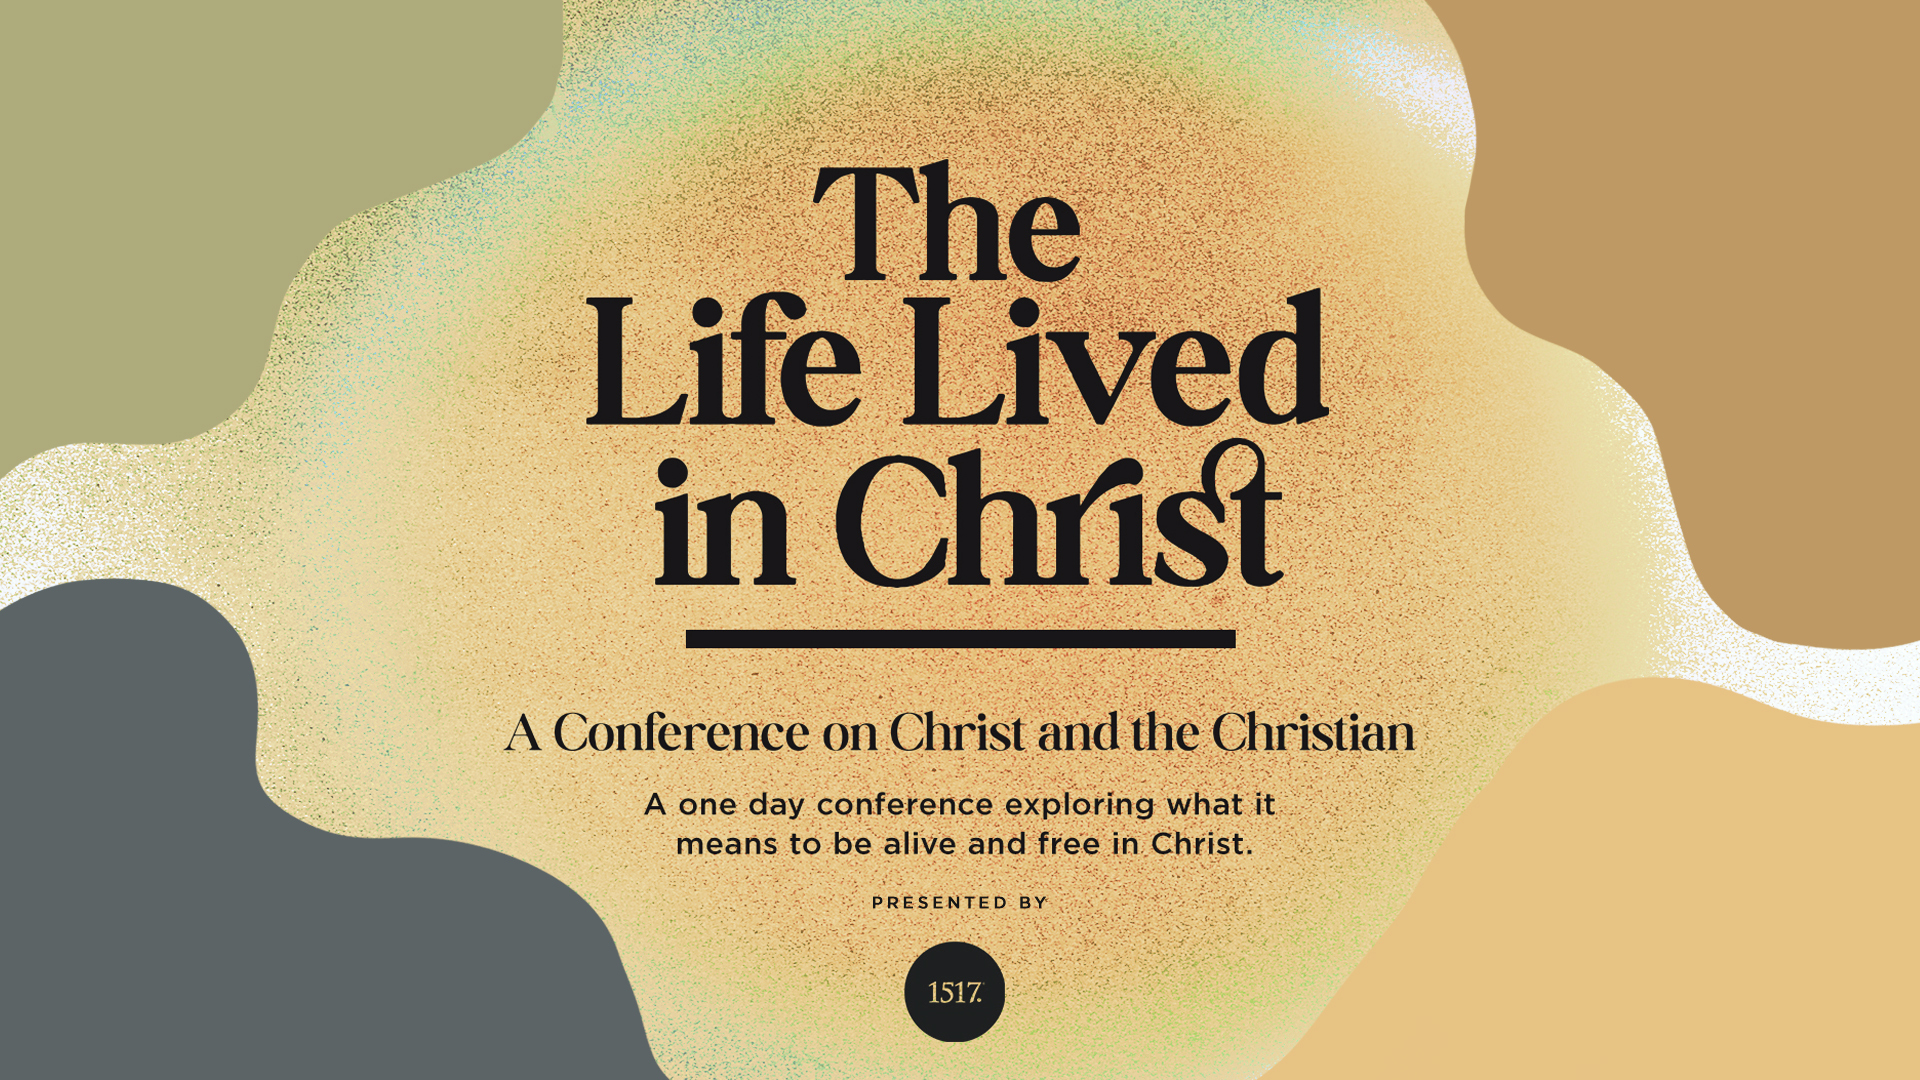 The Life Lived In Christ: A Conference on Christ and the Christian